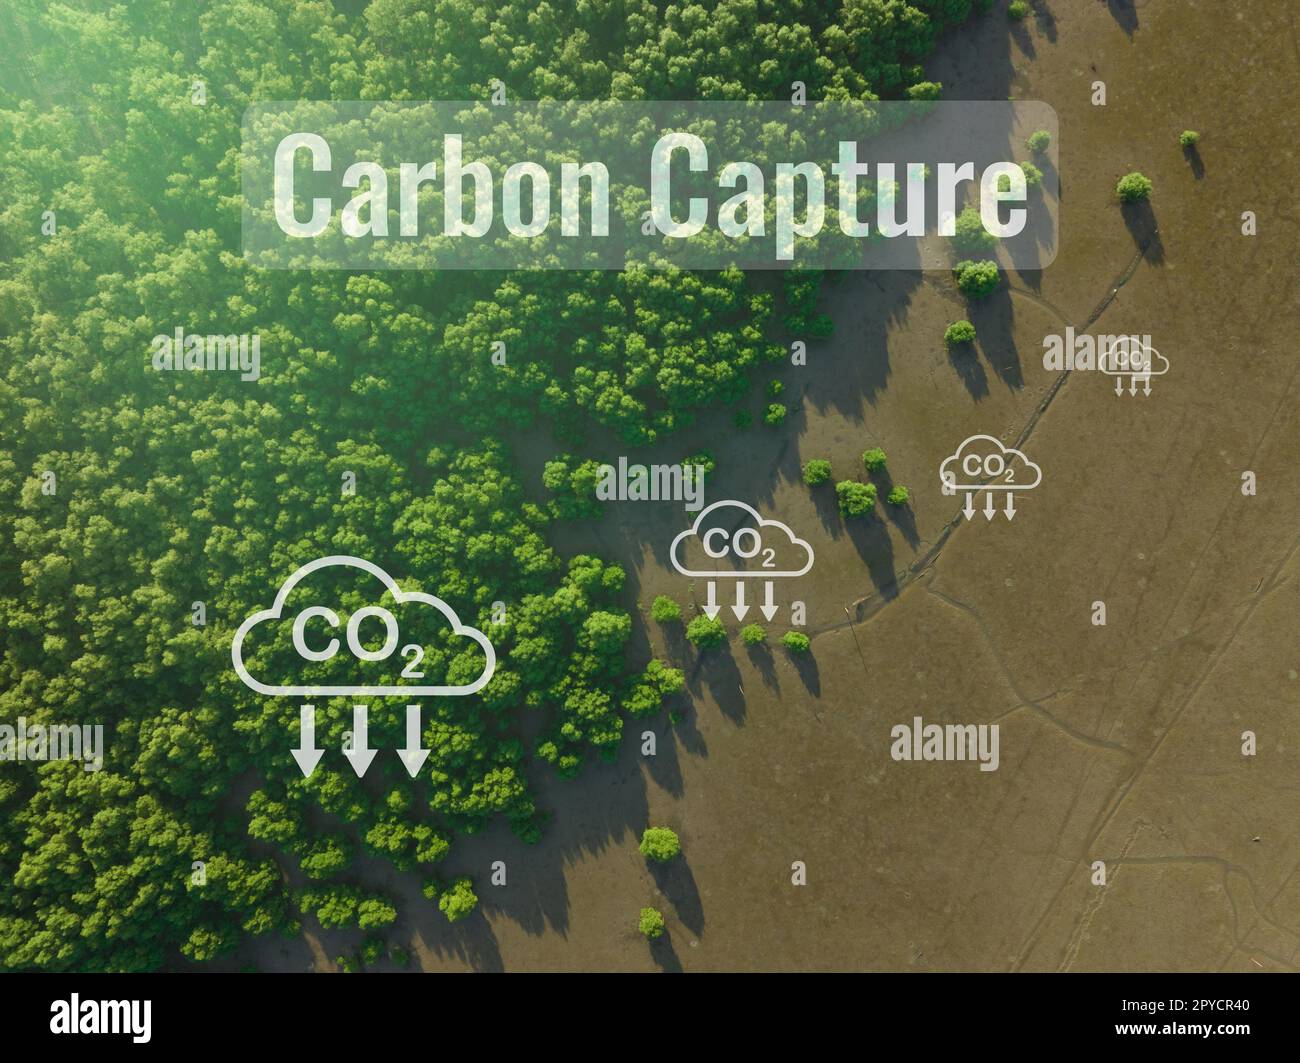 Carbon capture concept. Natural carbon sinks. Mangrove trees capture CO2 from the atmosphere. Aerial view of green mangrove forest. Blue carbon ecosystems. Mangroves absorb carbon dioxide emissions. Stock Photo